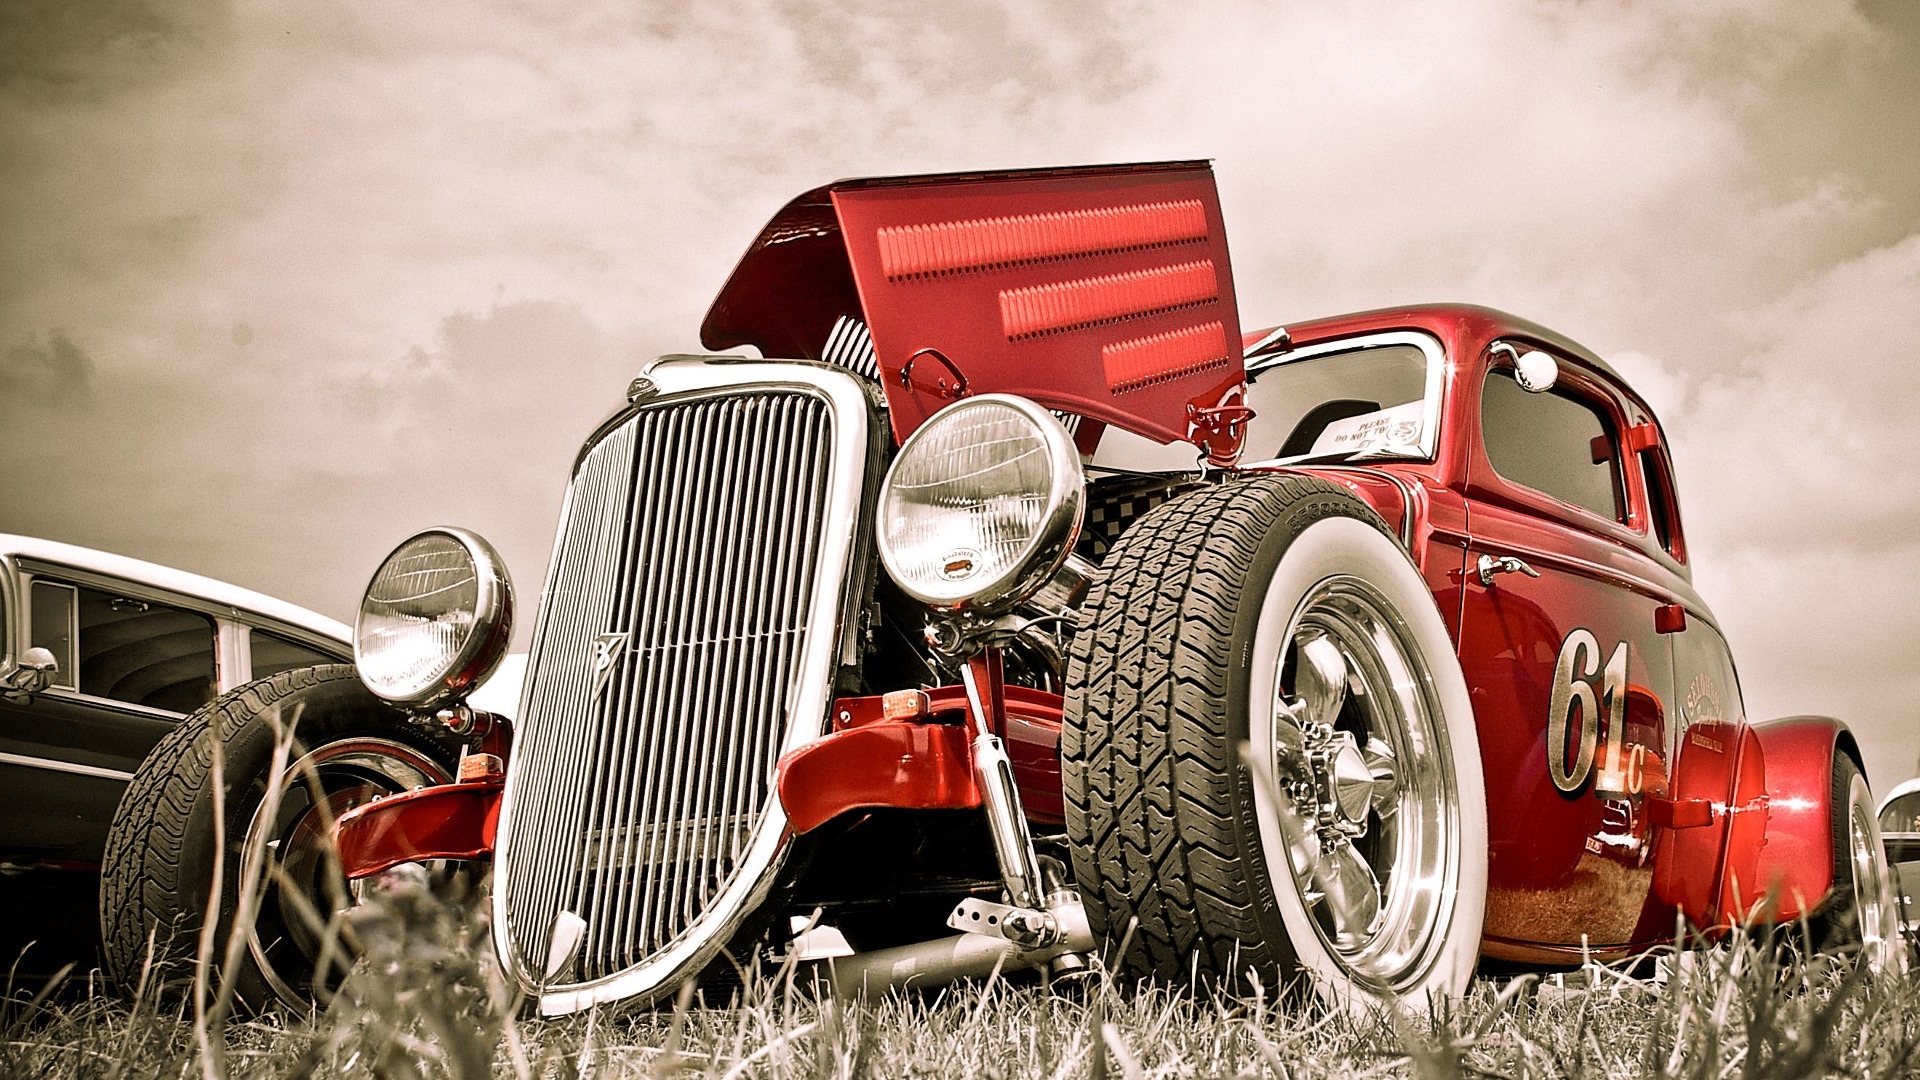 Red Fire Hot Rod HDR for 1920 x 1080 HDTV 1080p resolution